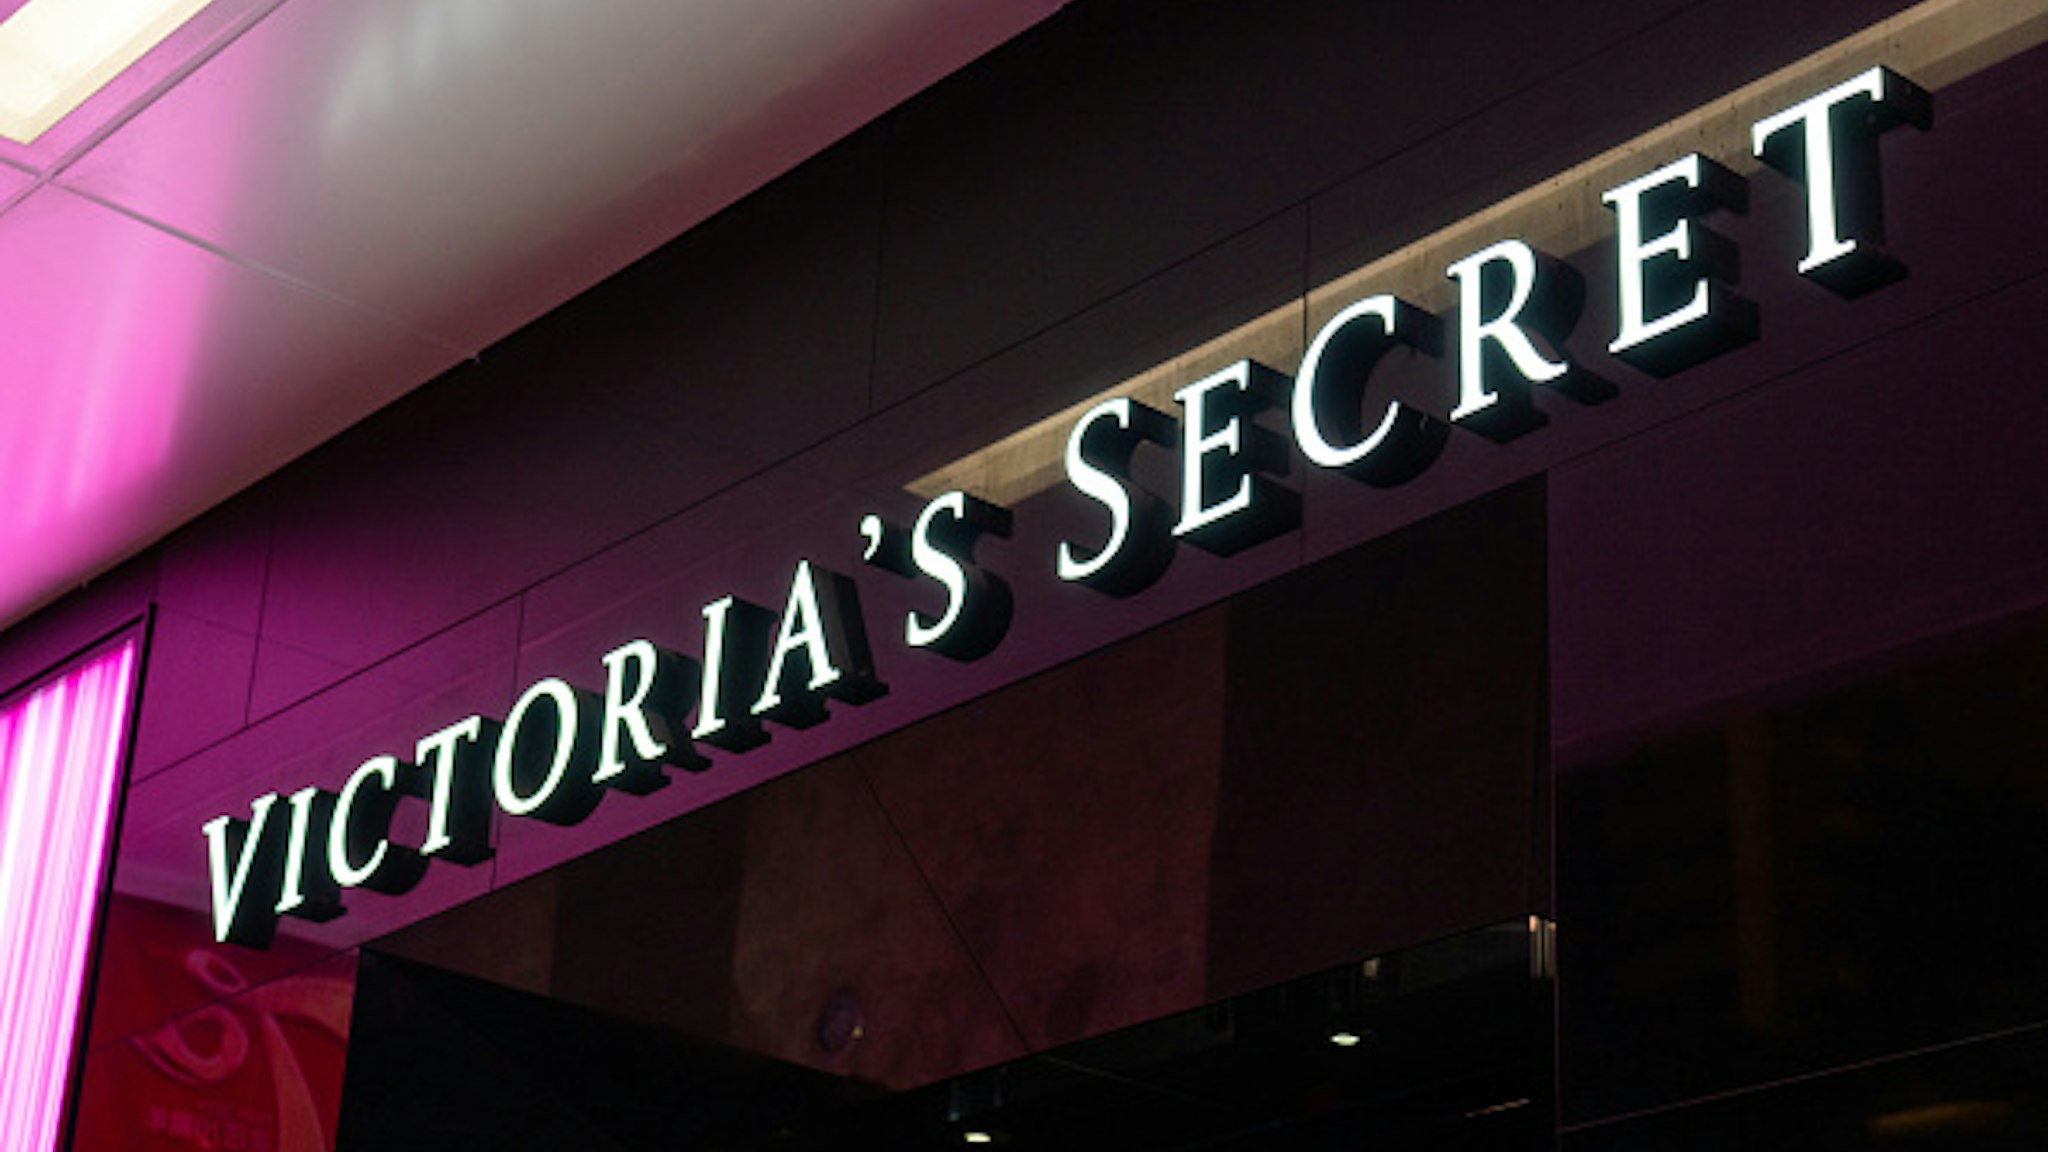 SHENZHEN, GUANGDONG, CHINA - 2019/10/06: A logo of Victoria's Secret, an American designer, manufacturer, and marketer of women's lingerie, womenwear, and beauty products, seen in Shenzhen.